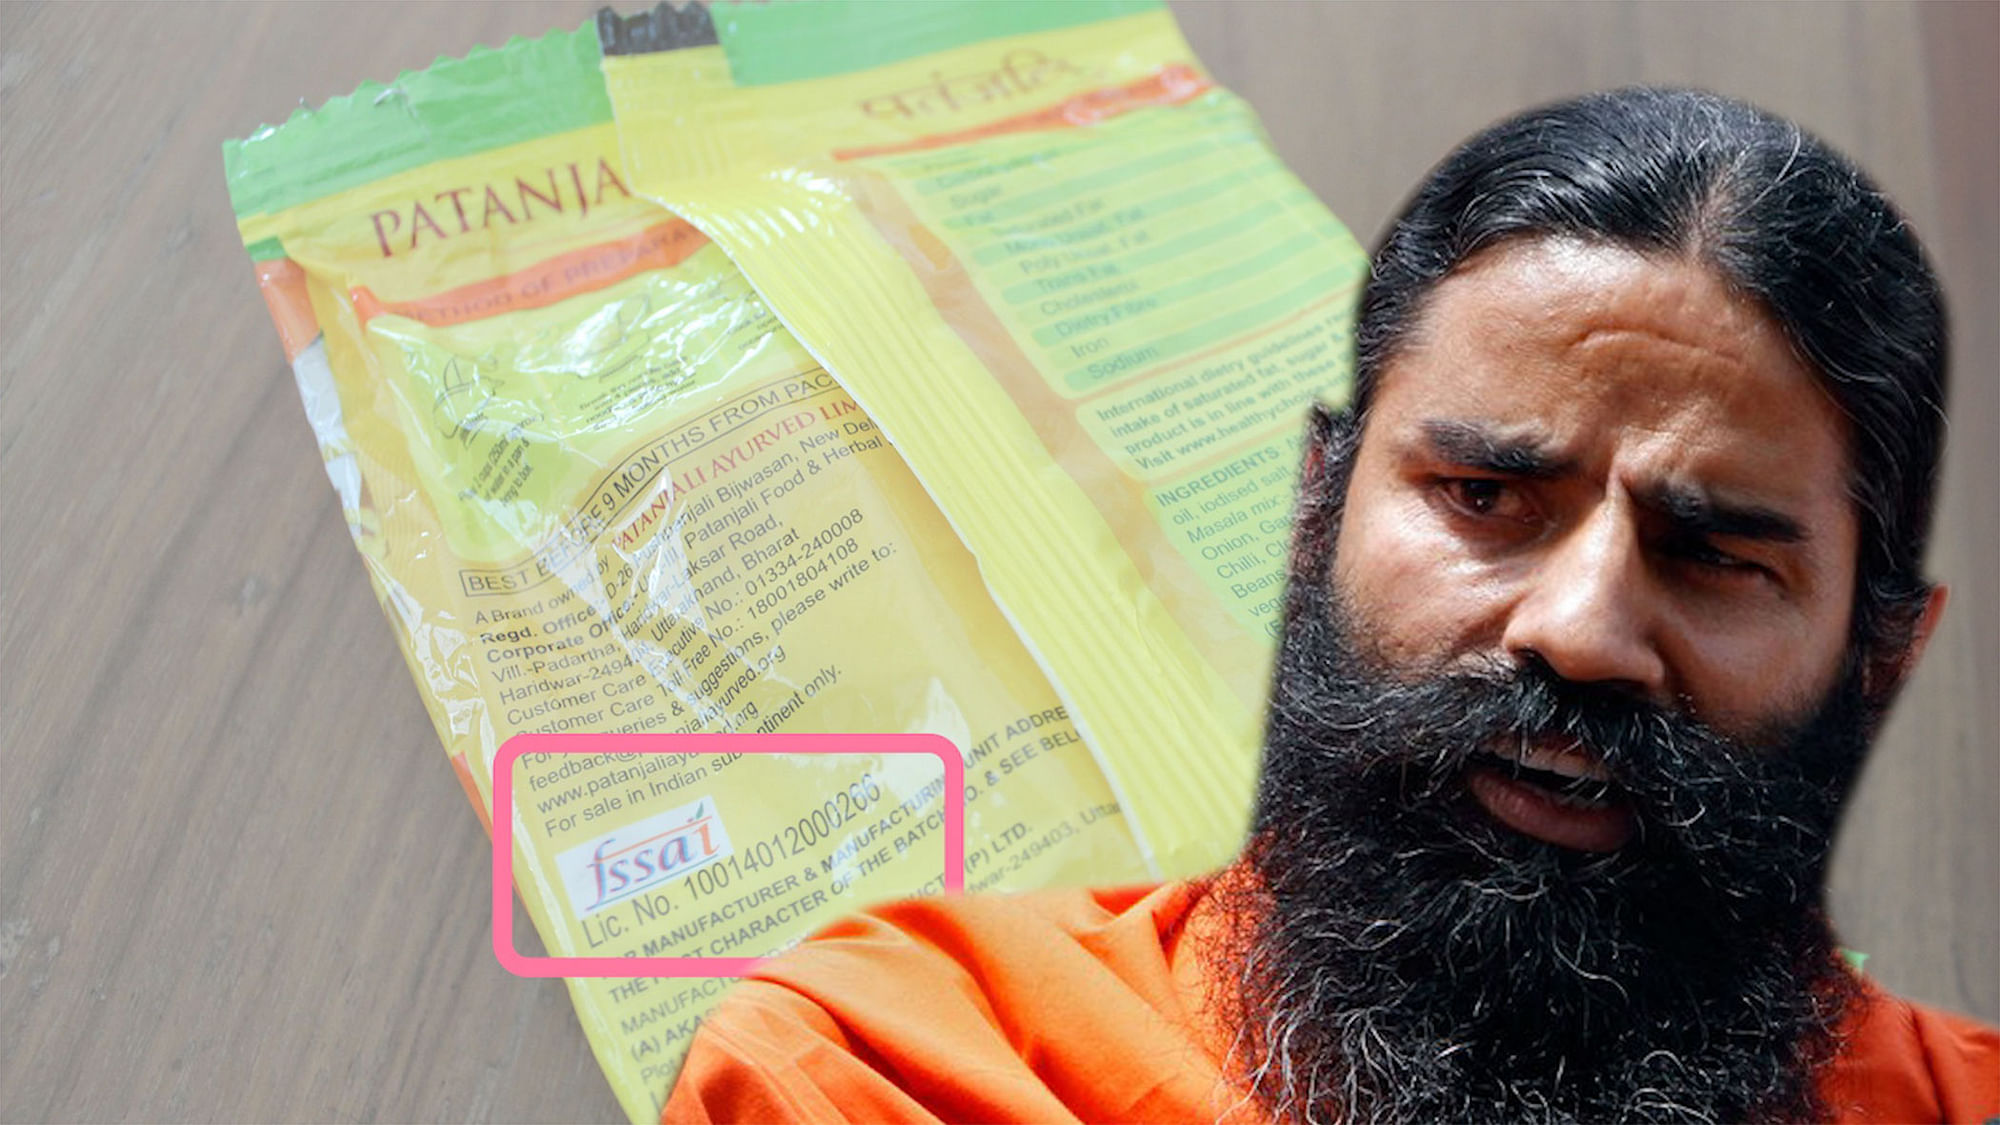 Yoga guru Ramdev claims Patanjali noodles are approved by FSSAI. (Photo: <b>The Quint</b>)